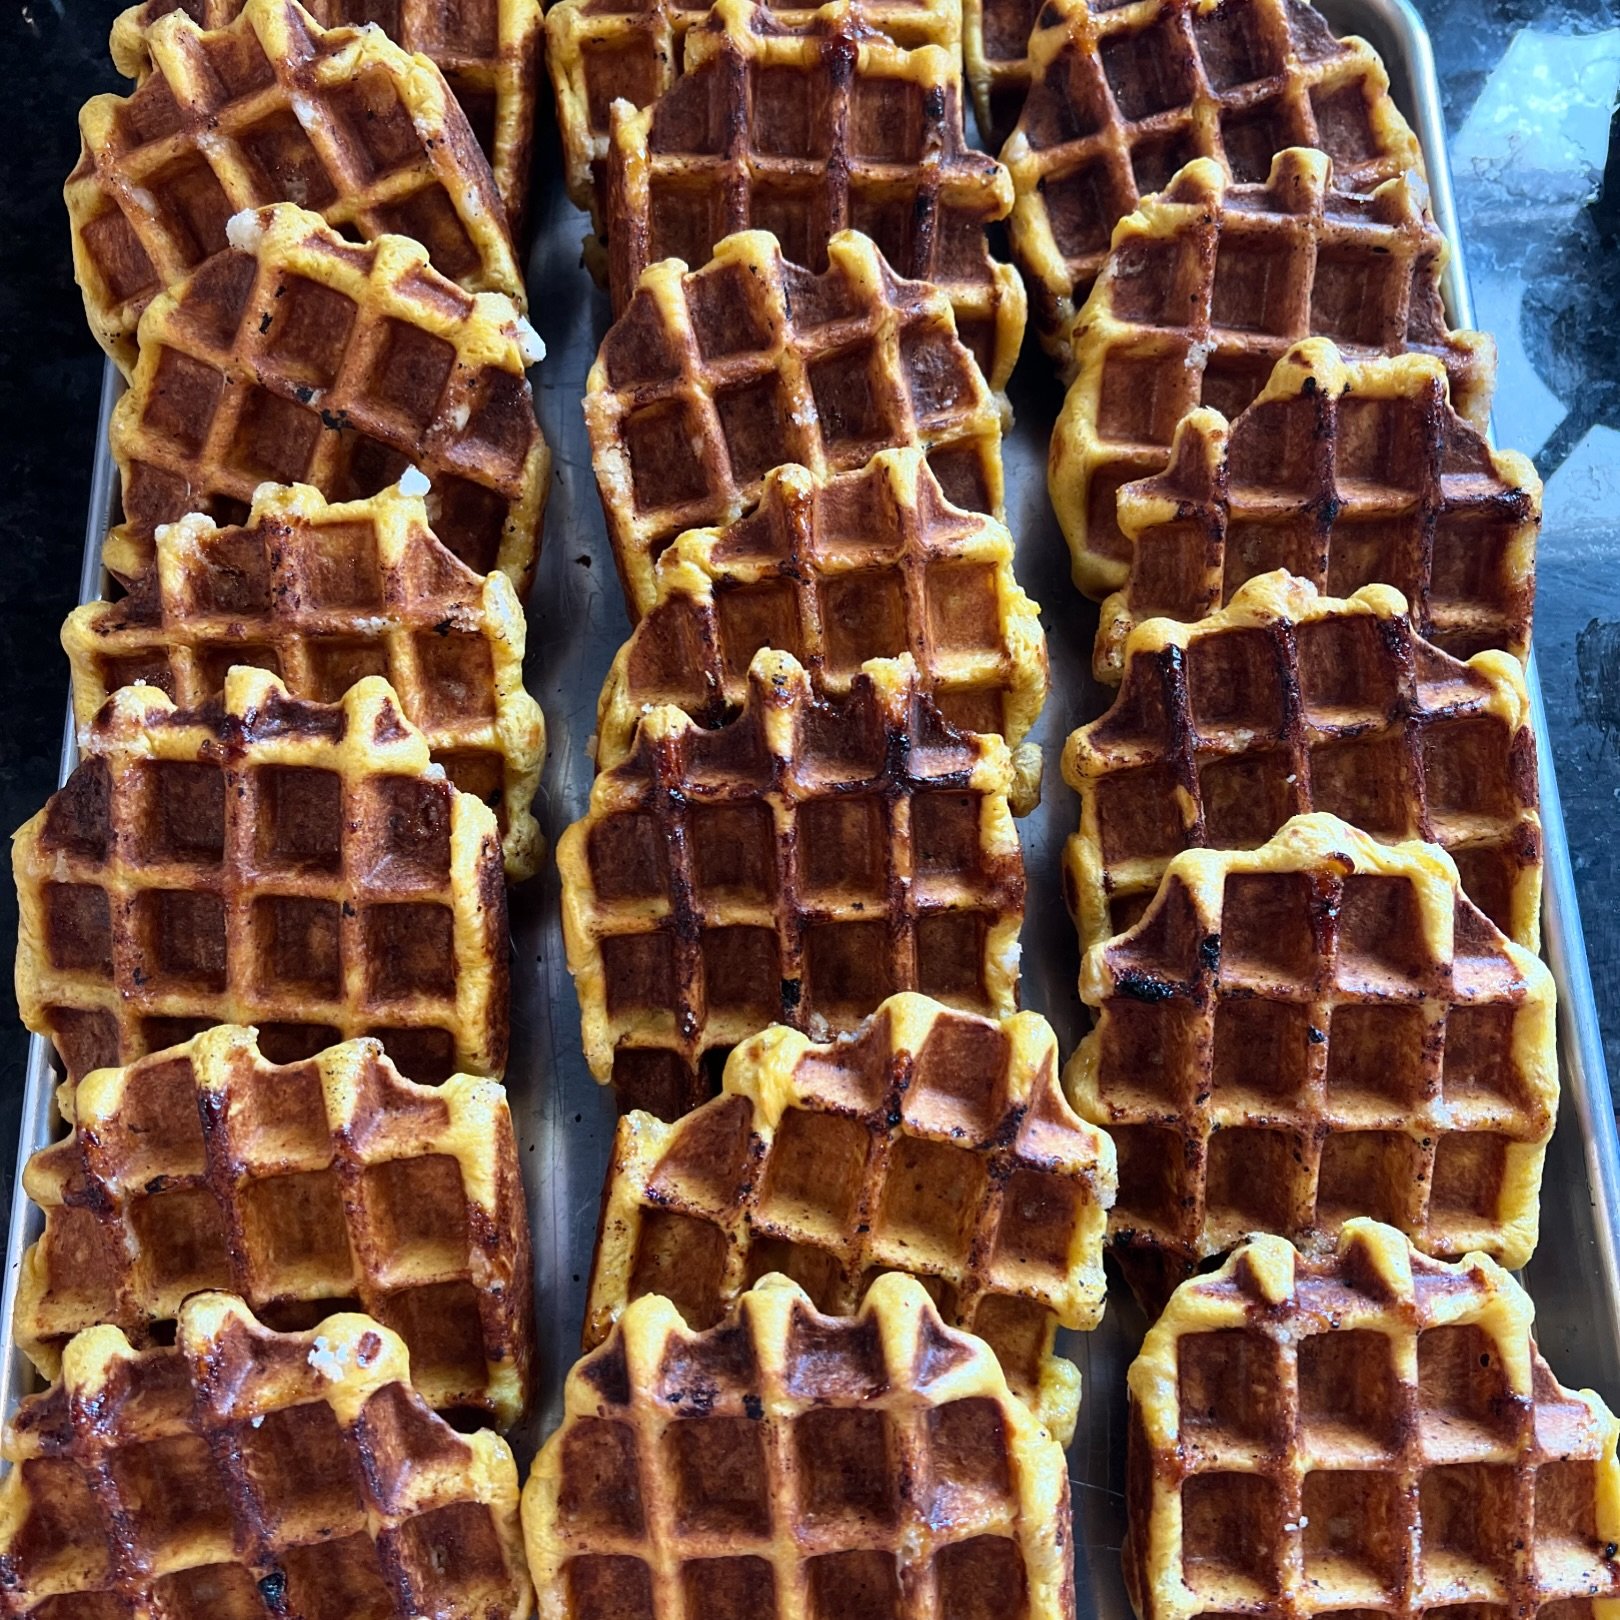 Waffles catering is always available! Made from scratch, cooked to order, and bite sizes are available! Call the shop to order (307)333-4524